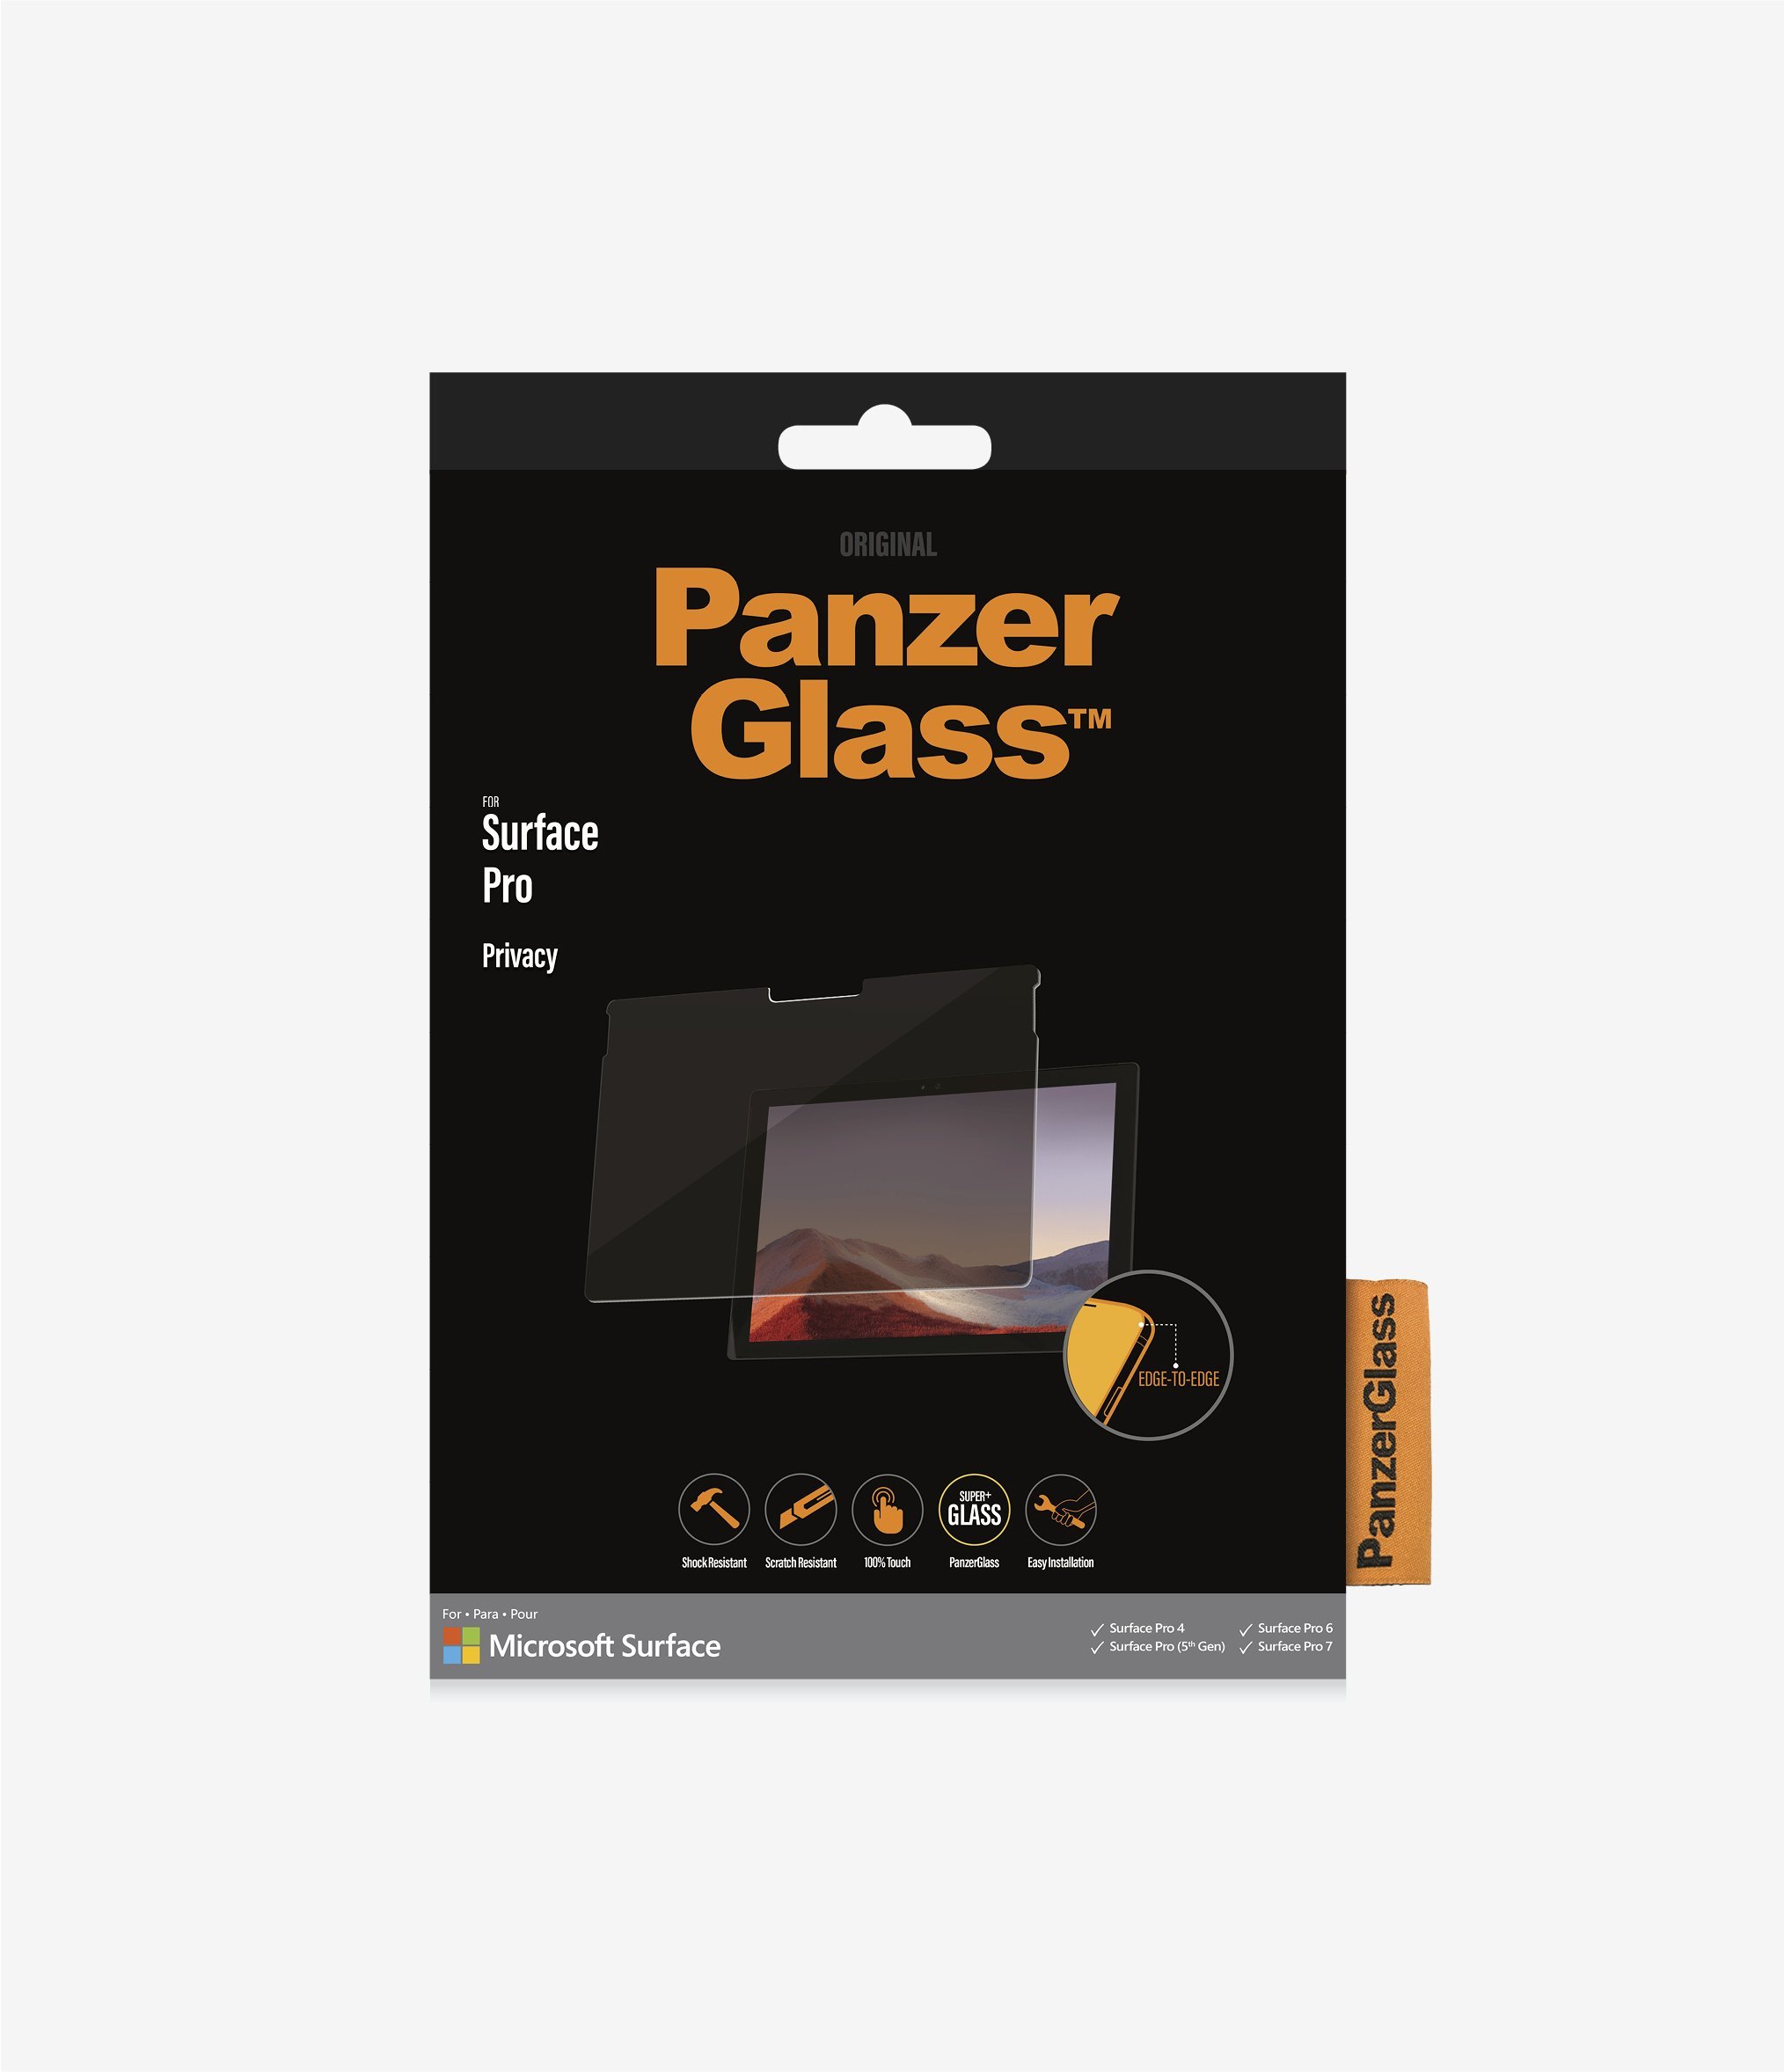 PanzerGlass™ Microsoft Surface Pro 4/Pro 5/Pro 6/Pro 7 - Screen Protector - Full Frame Coverage, Rounded edges, 100% touch preservation, Crystal clear